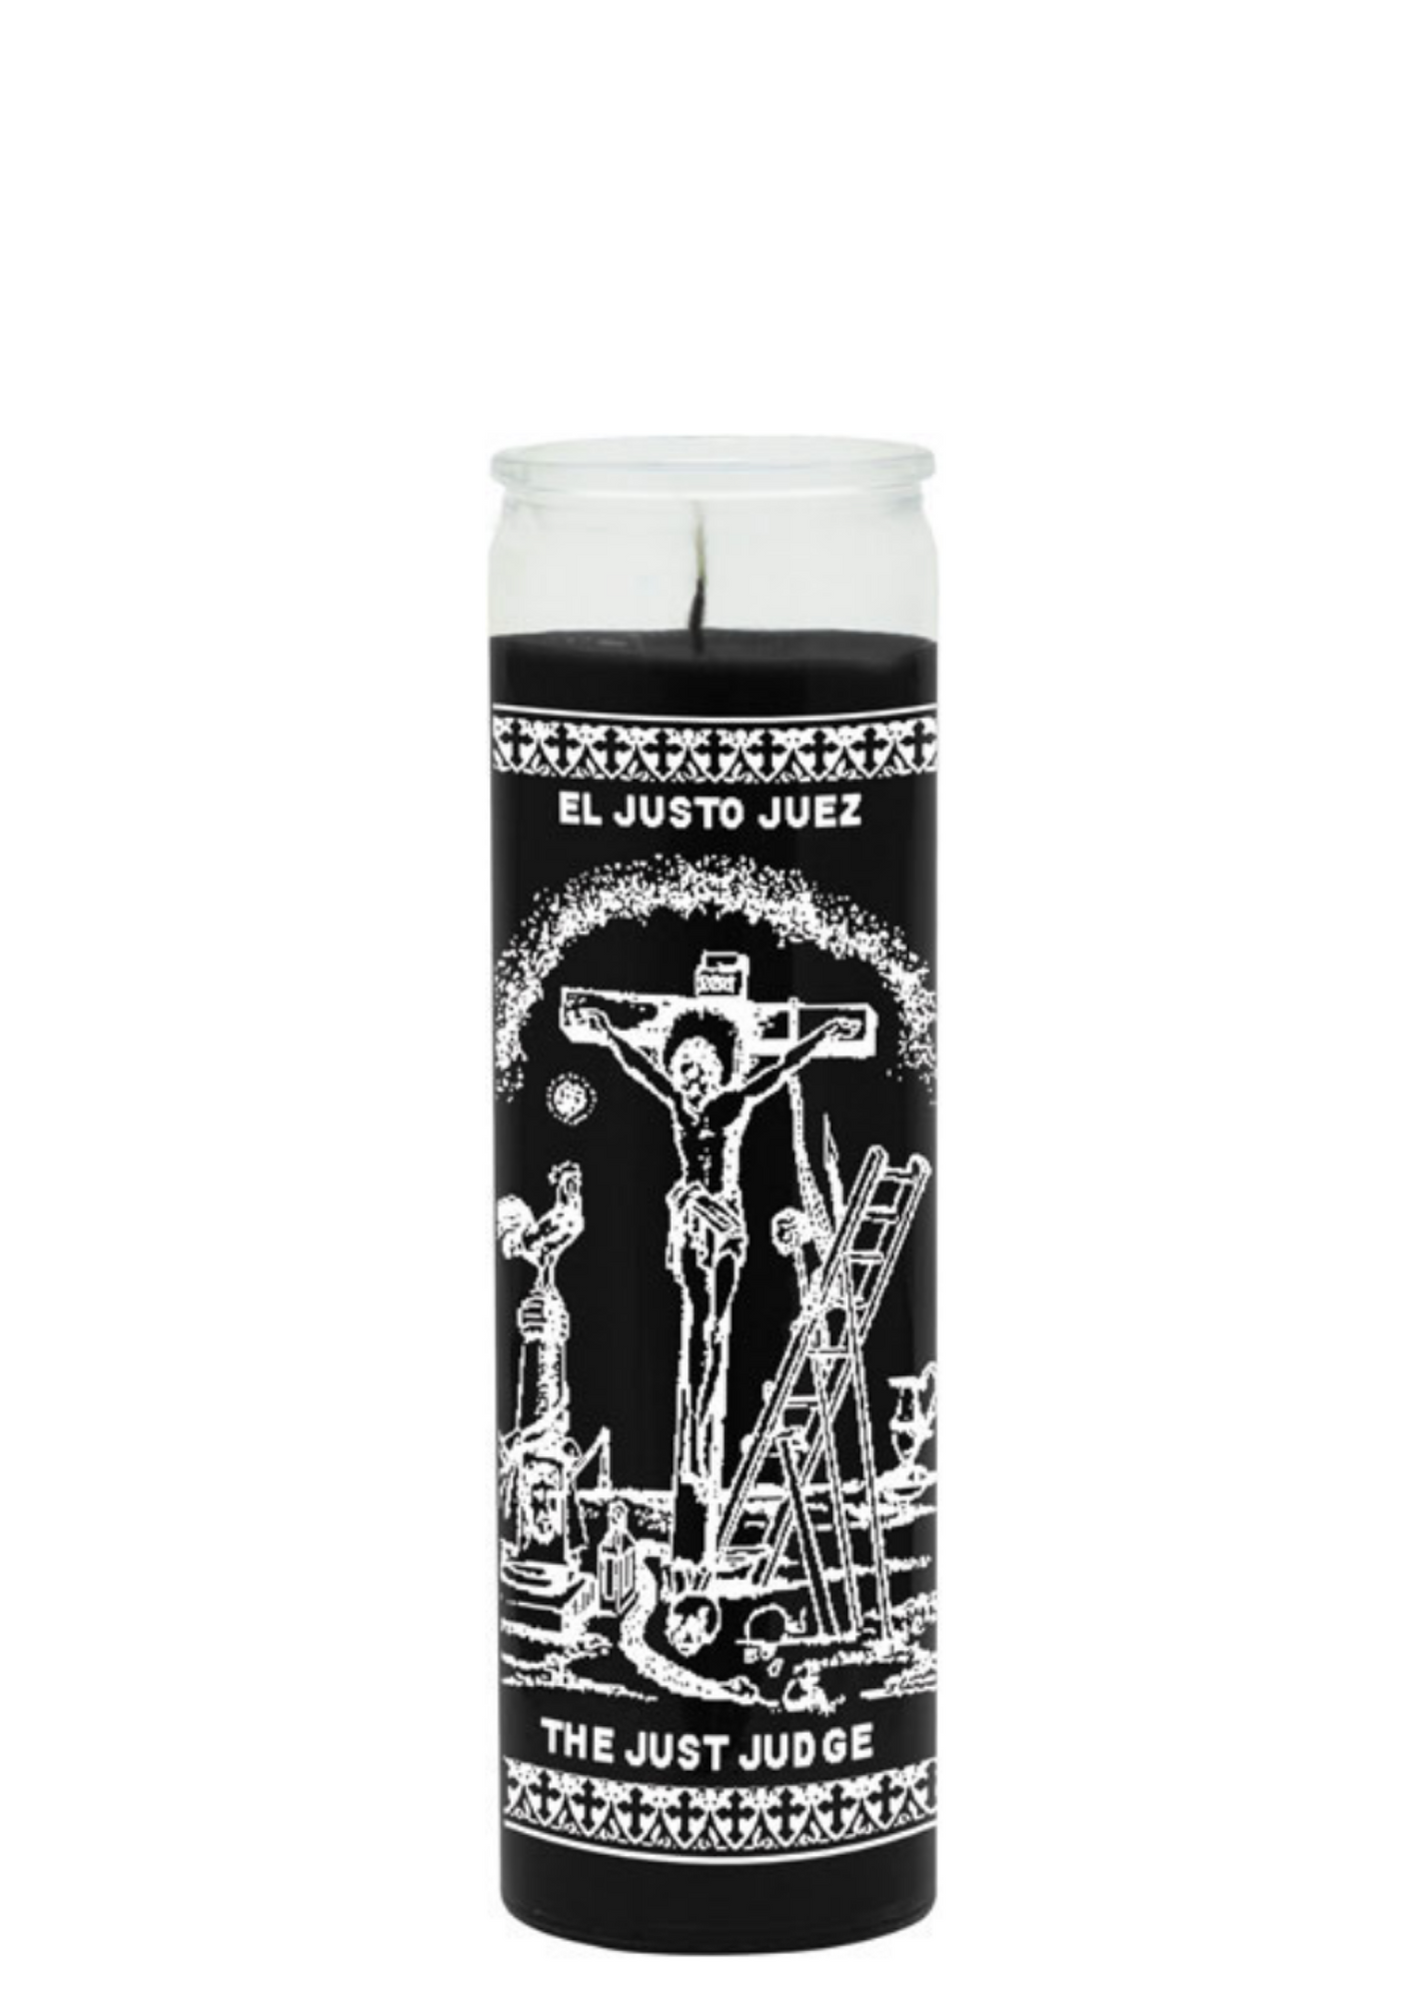 The just judge (black) 1 color 7 day candle